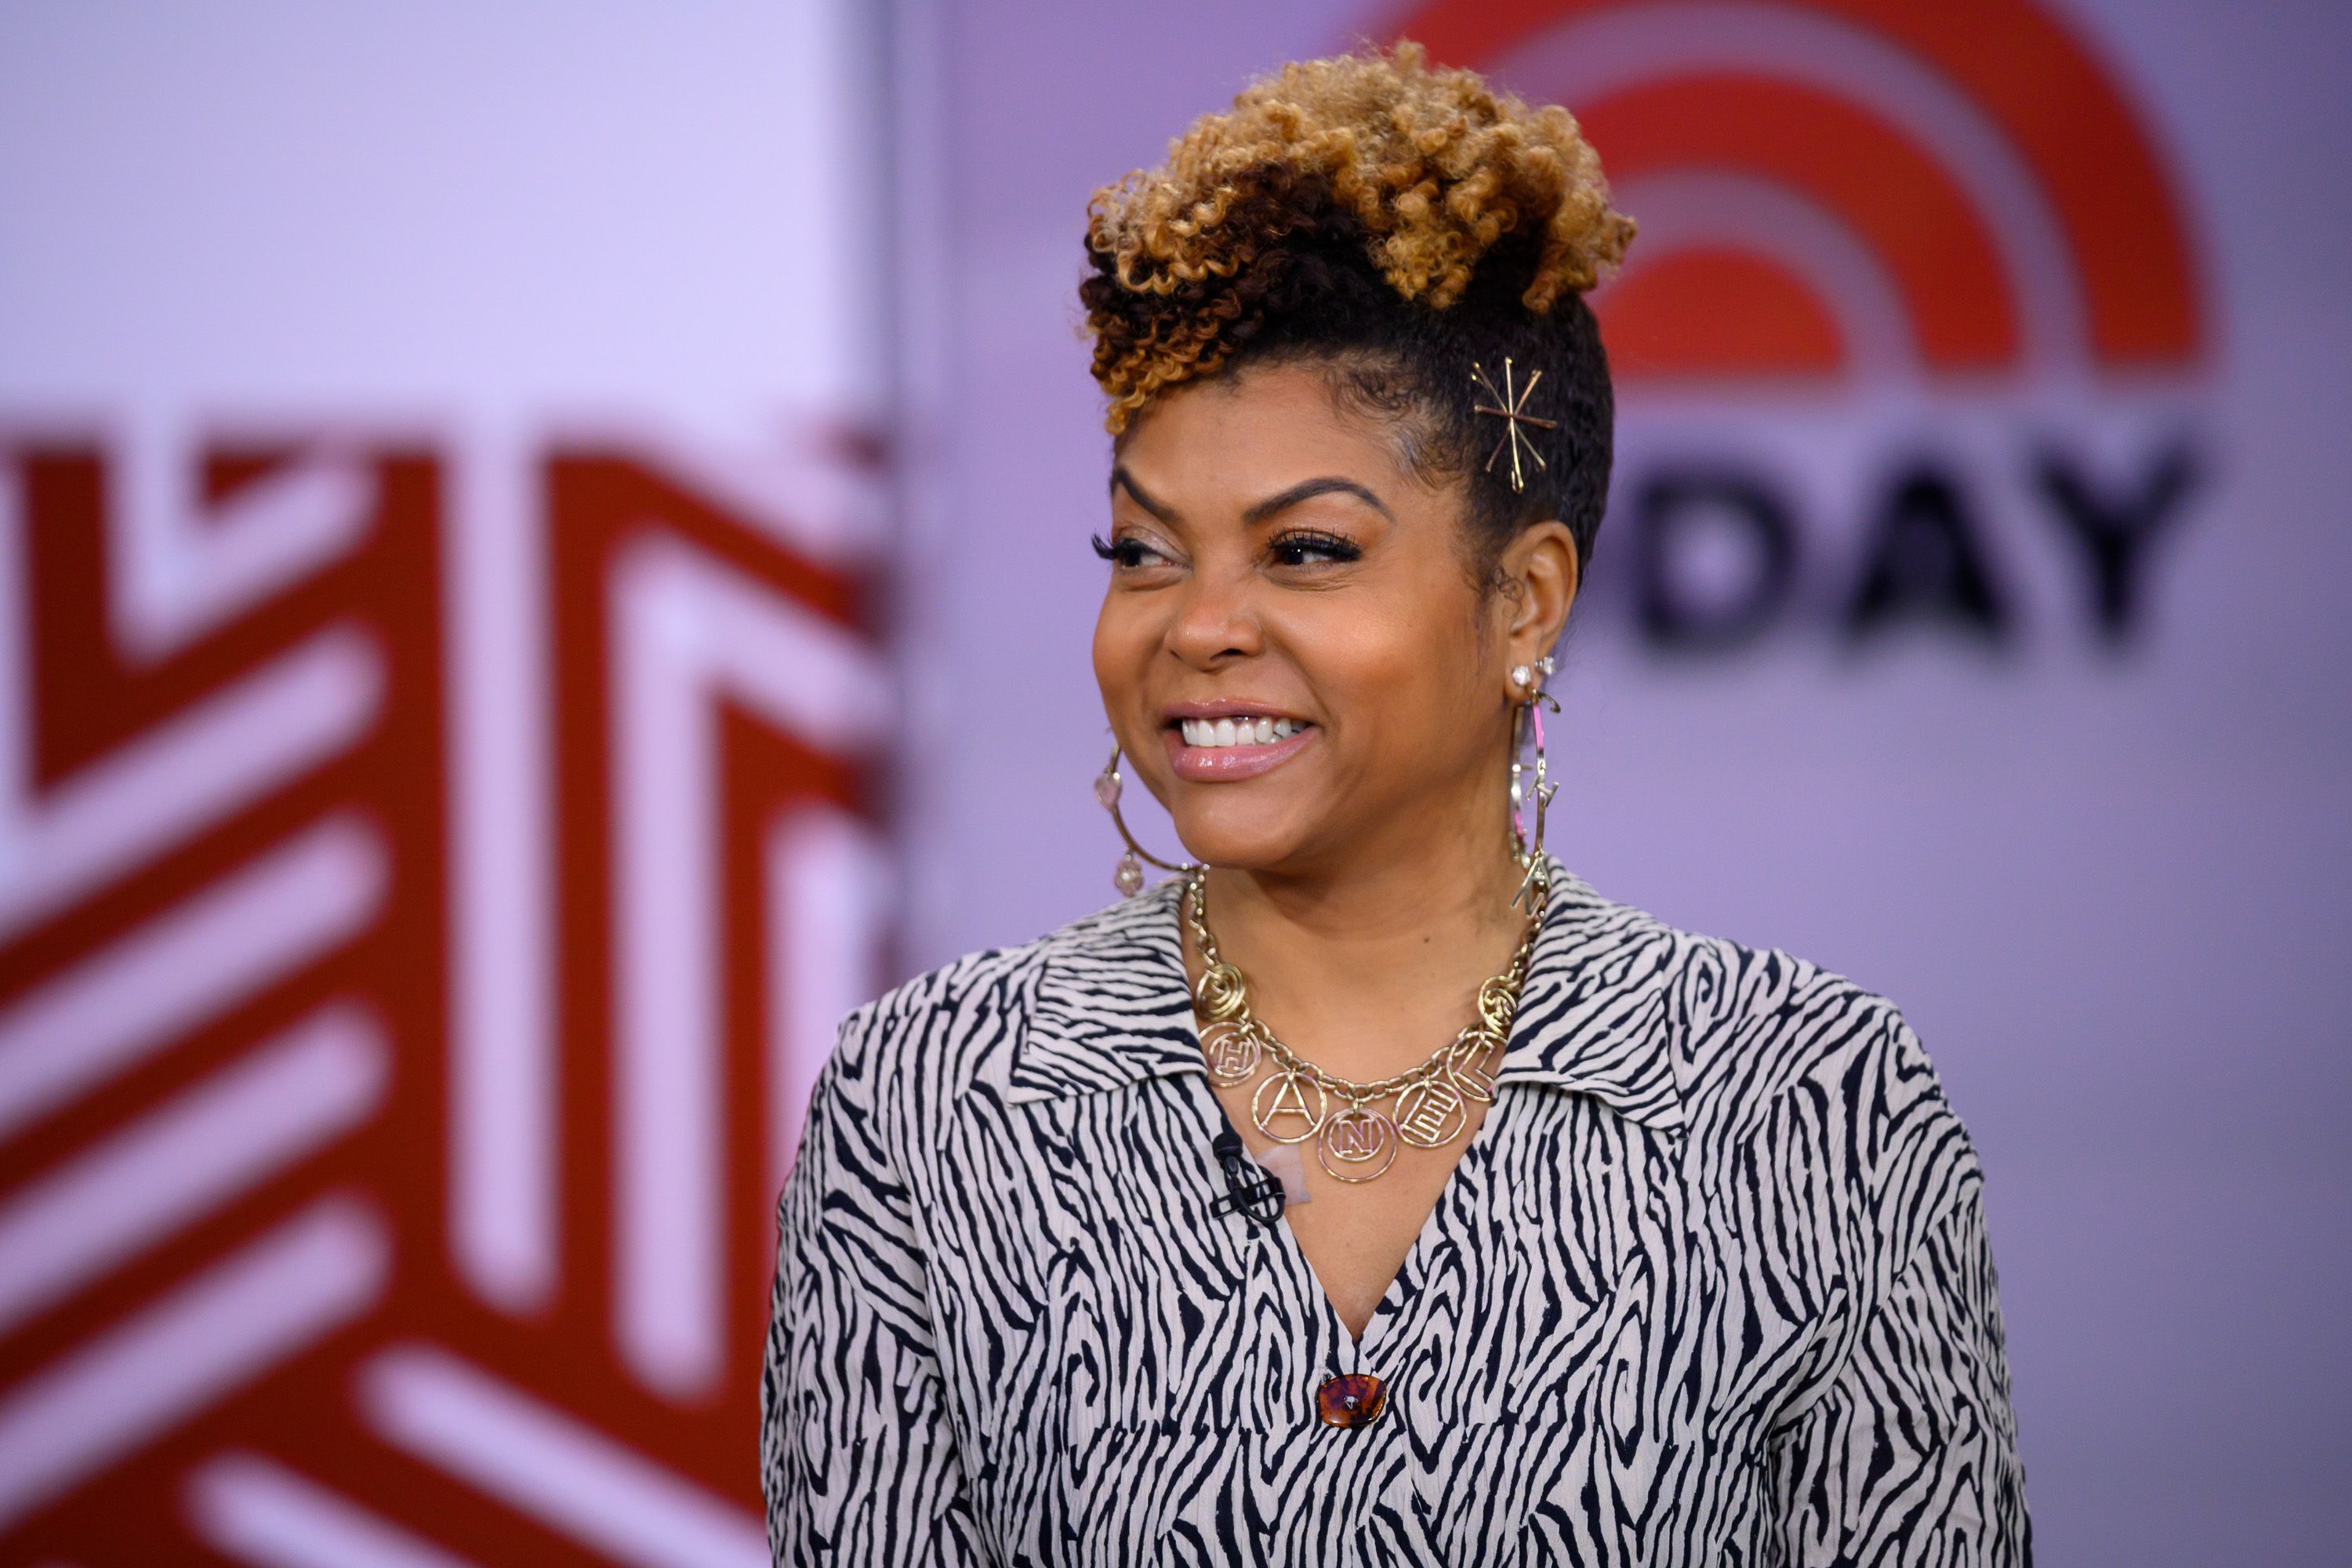 A picture of Actress Taraji P. Henson on Friday, January 24, 2020. [Unspecified location] | Photo: Getty Images